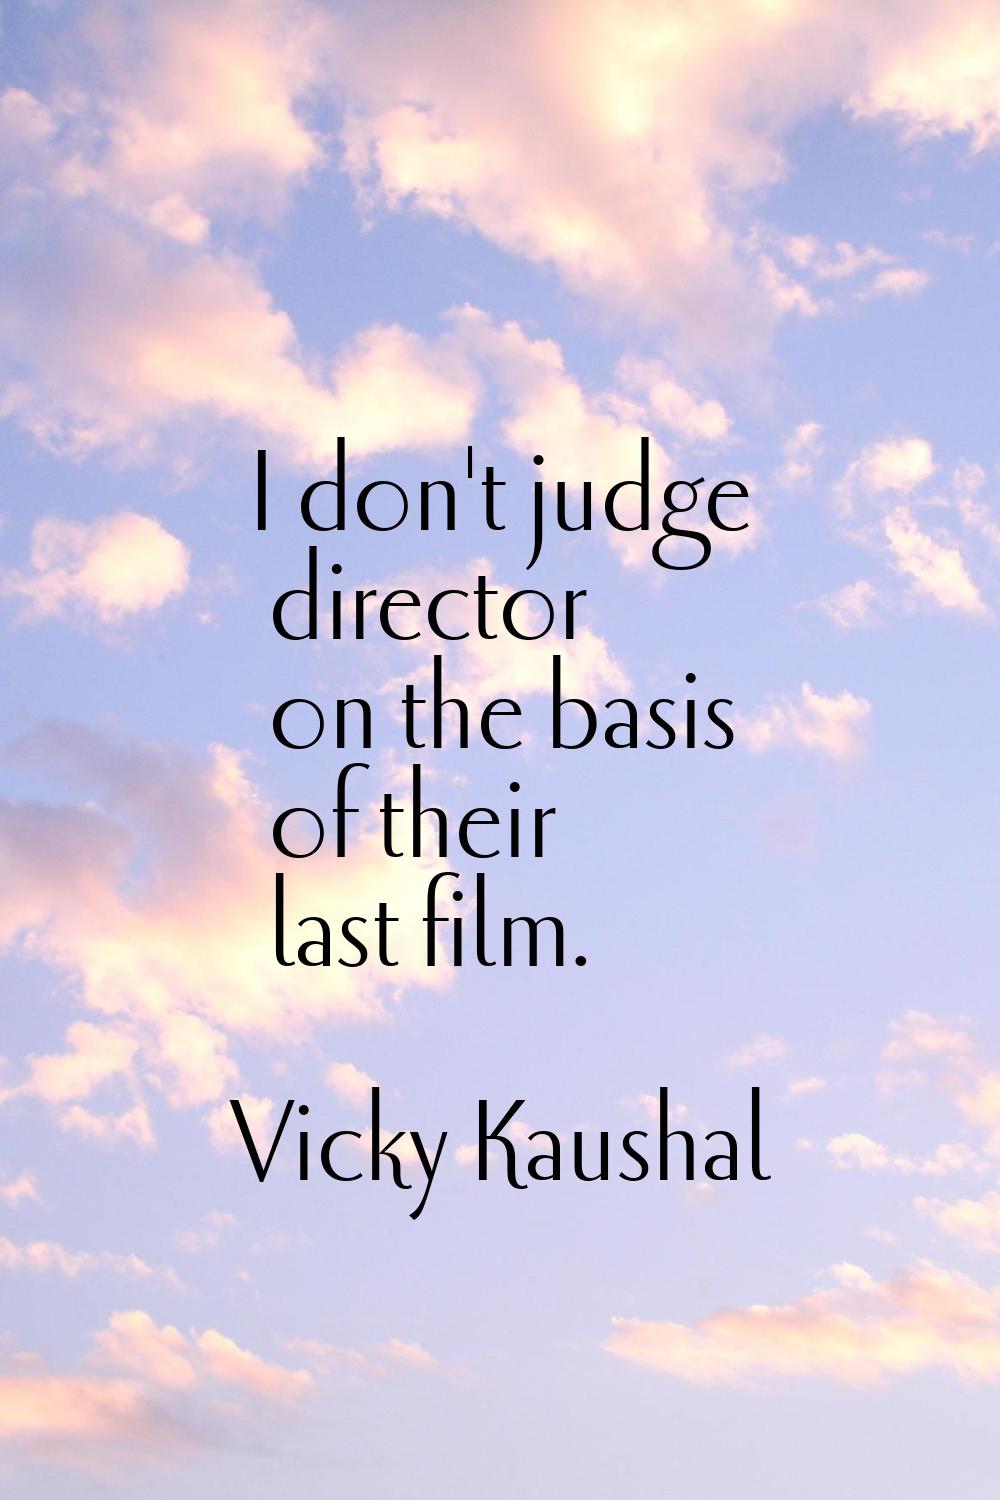 I don't judge director on the basis of their last film.